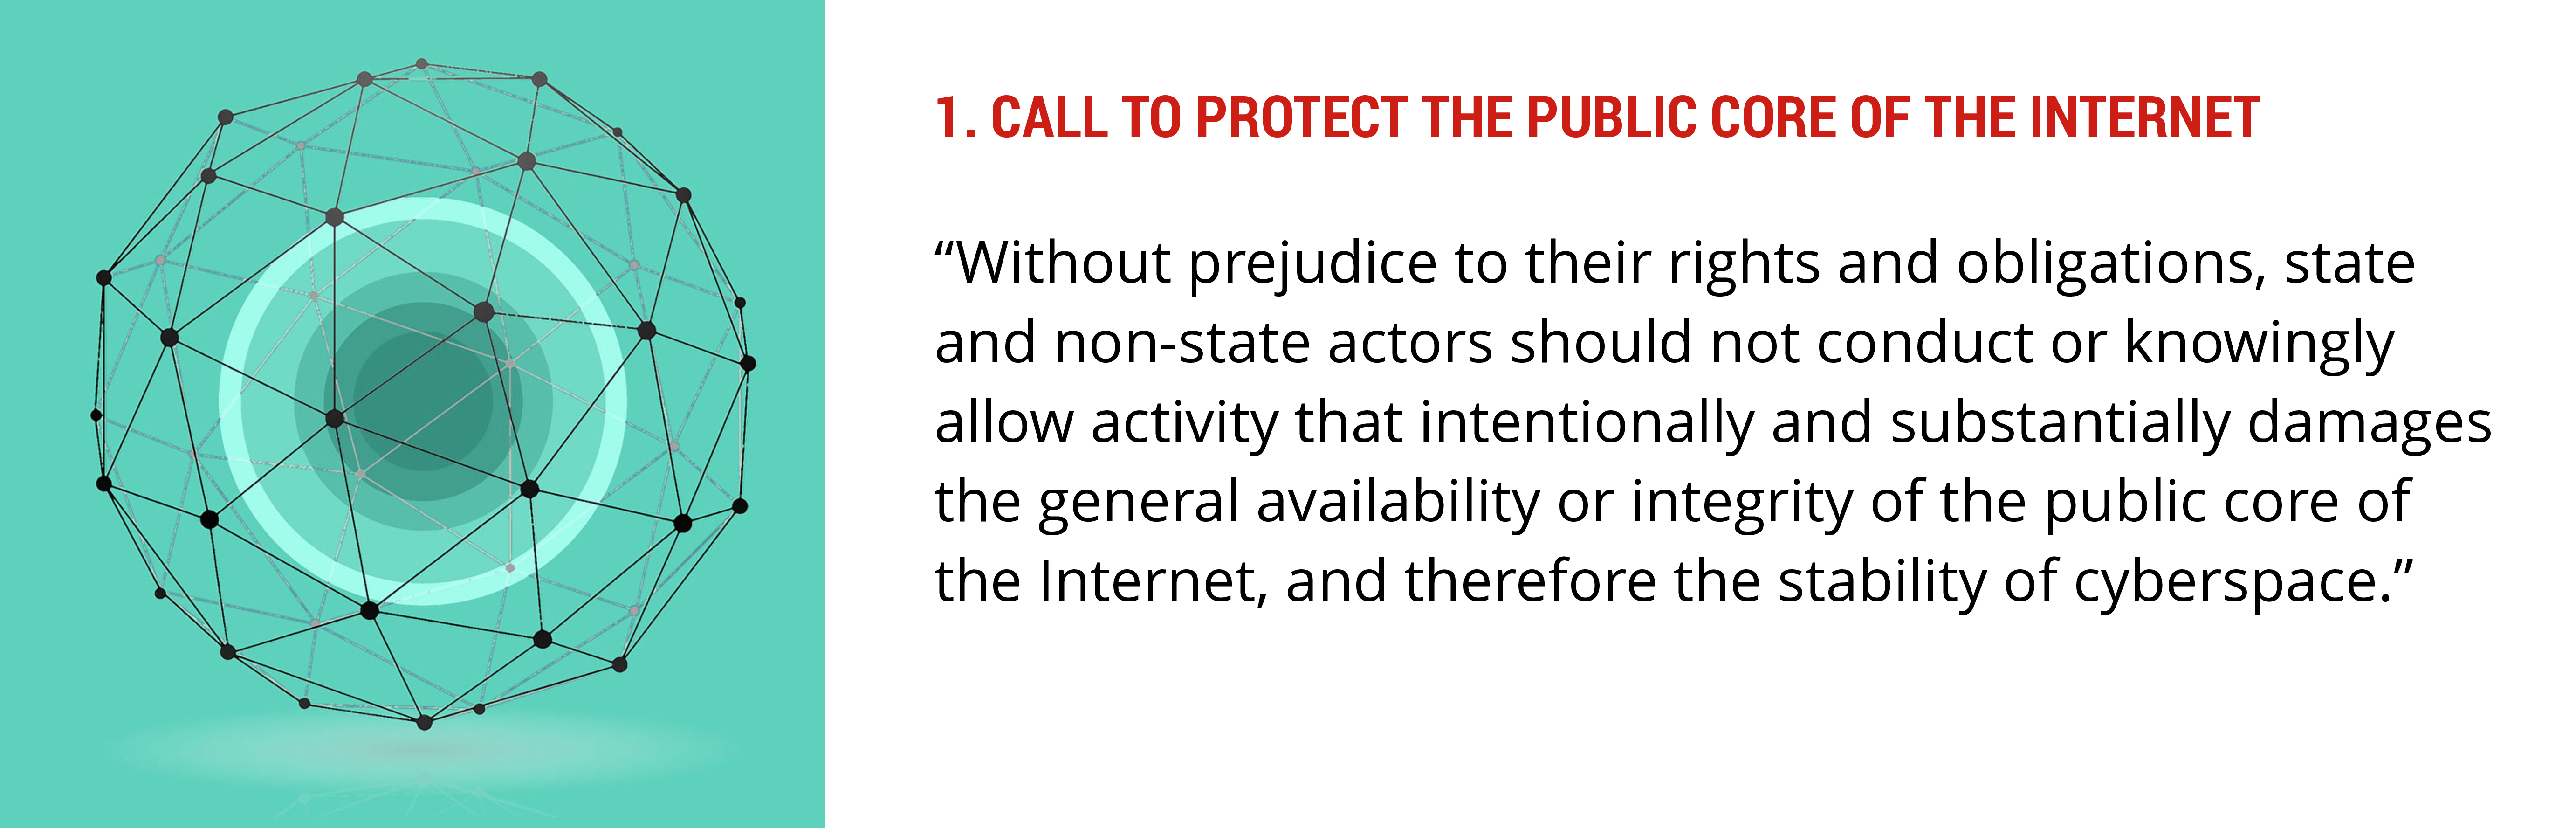 Norm to Protect the Public Core of the Internet 